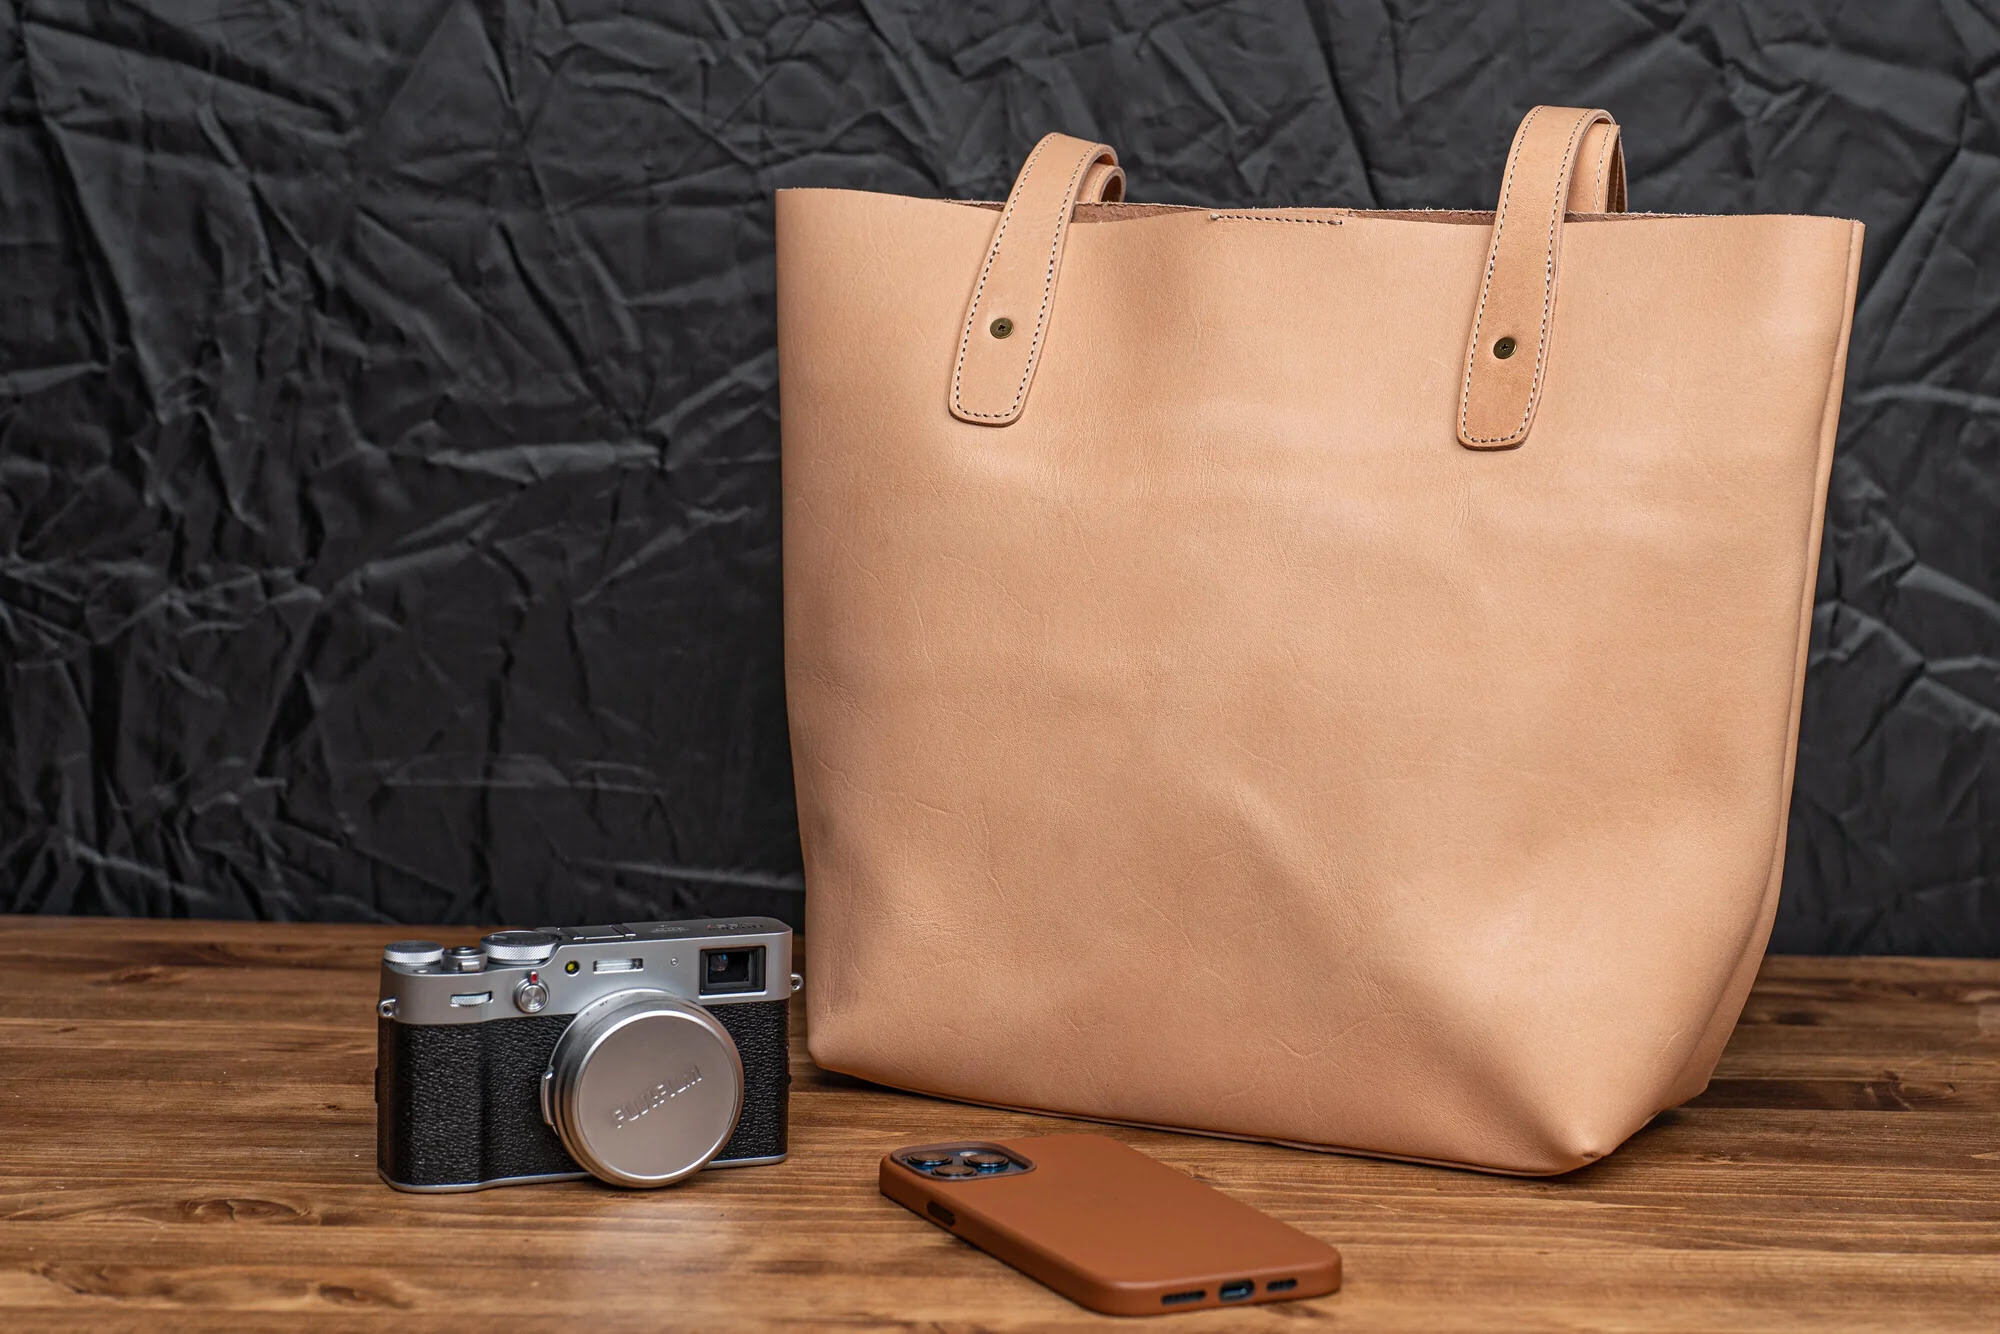 Review: Stylish Leather Tote Bag - A Must-Have Accessory